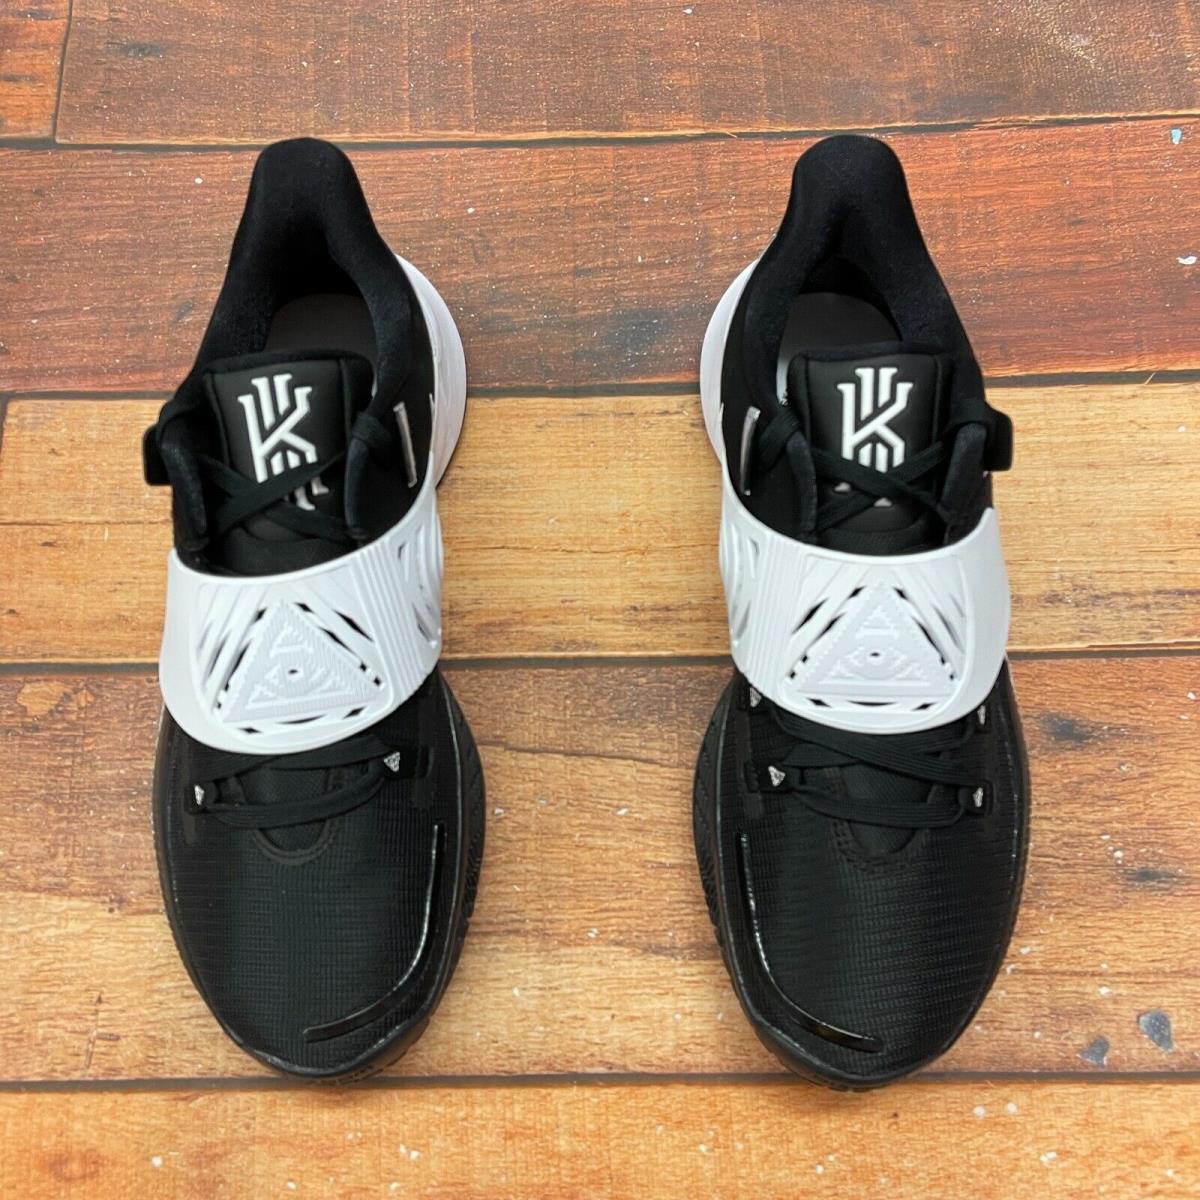 Nike shoes Kyrie Low - Black 1